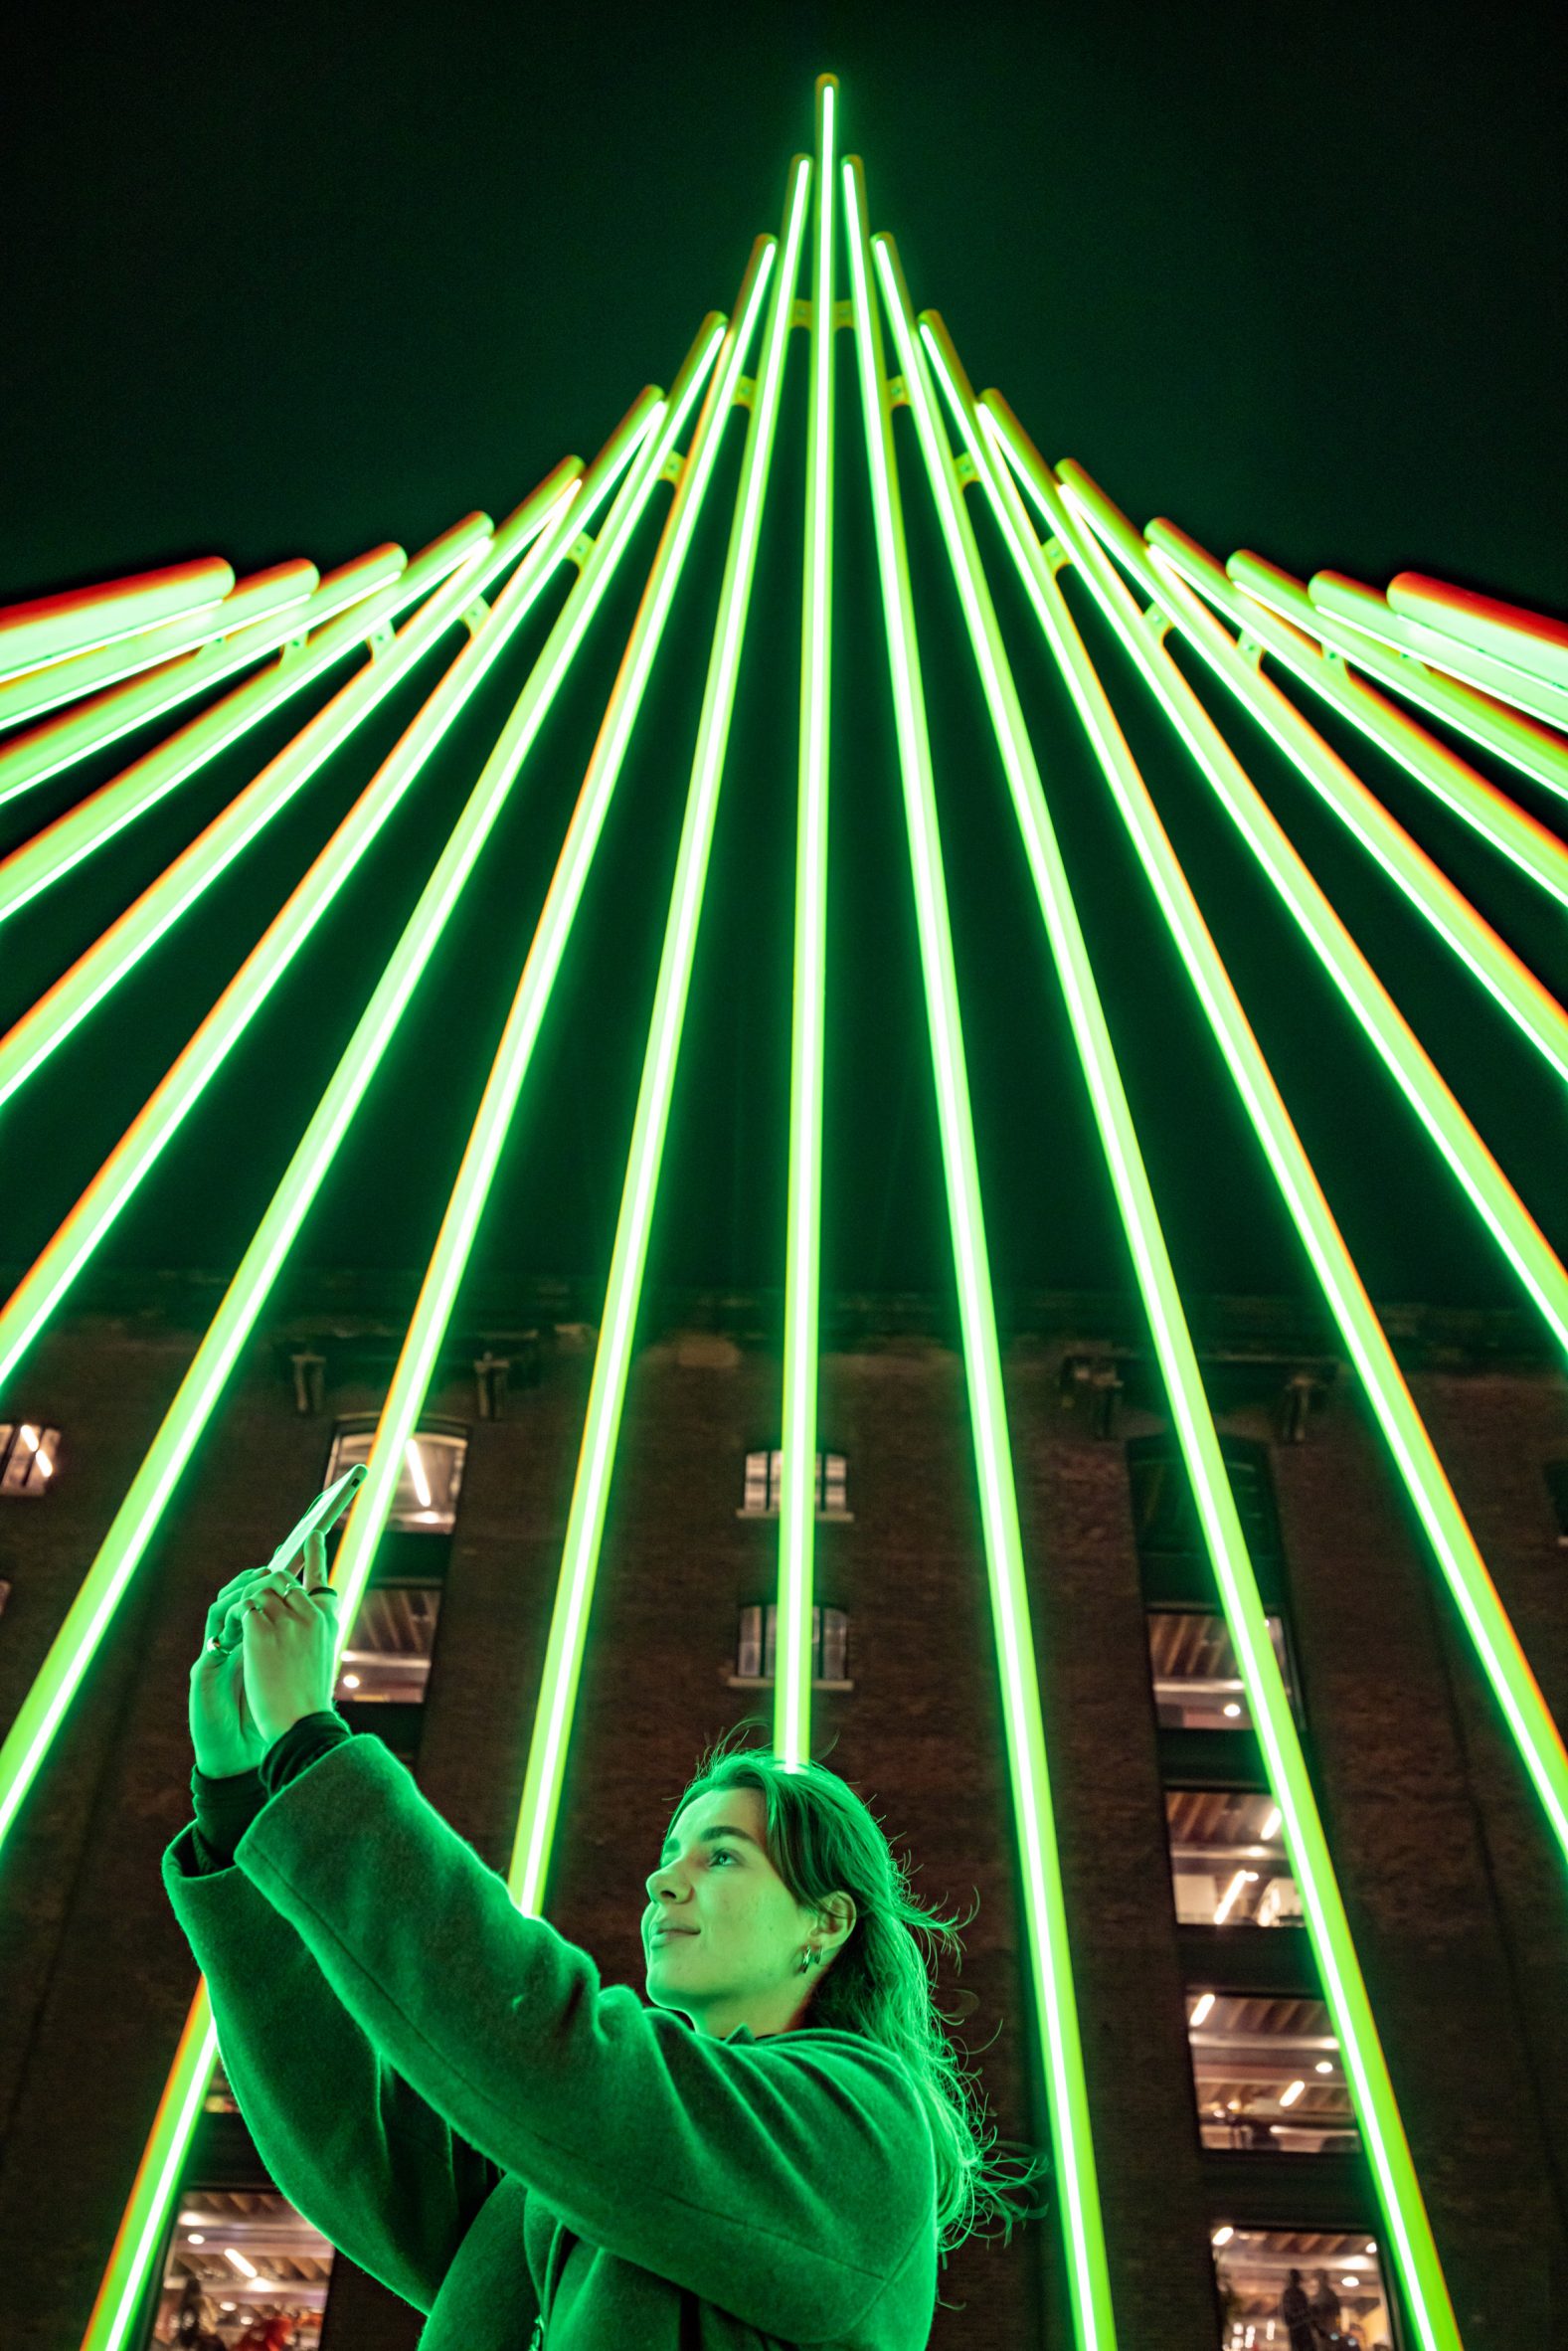 A person pictured inside the green glowing Temenos